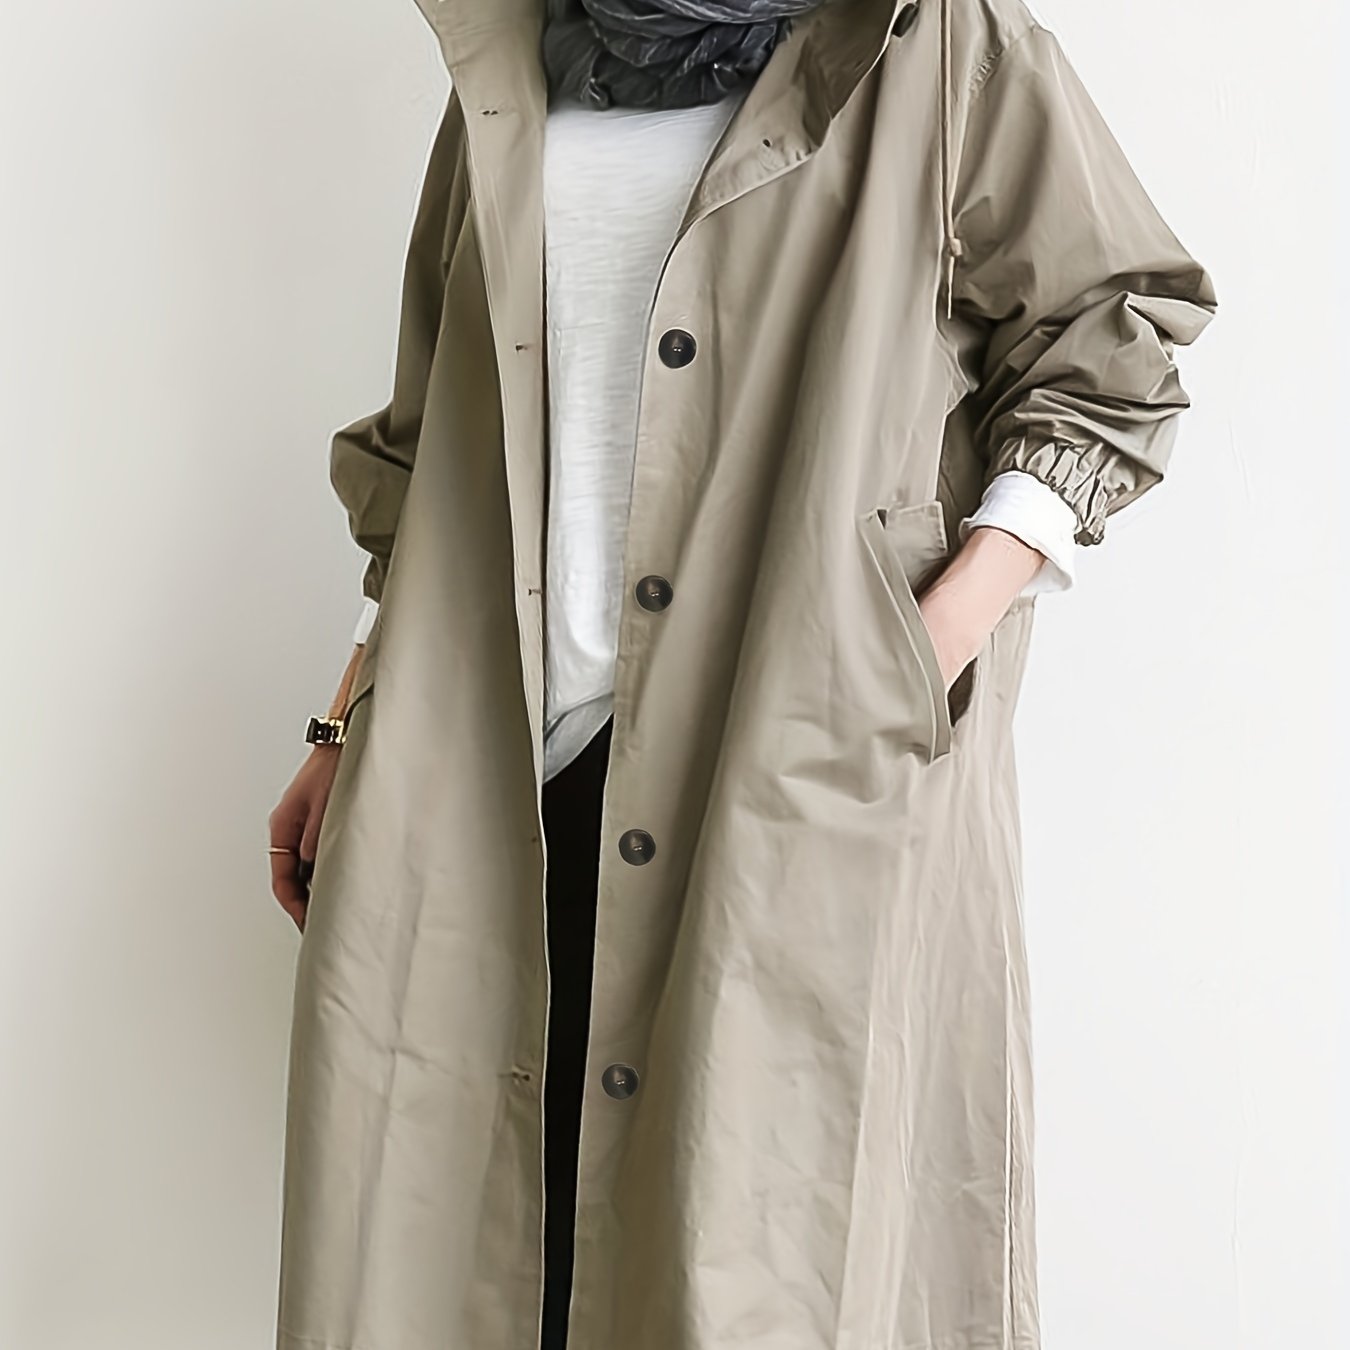 vlovelaw  Drawstring Hooded Trench Coat, Casual Solid Long Sleeve Outerwear, Women's Clothing